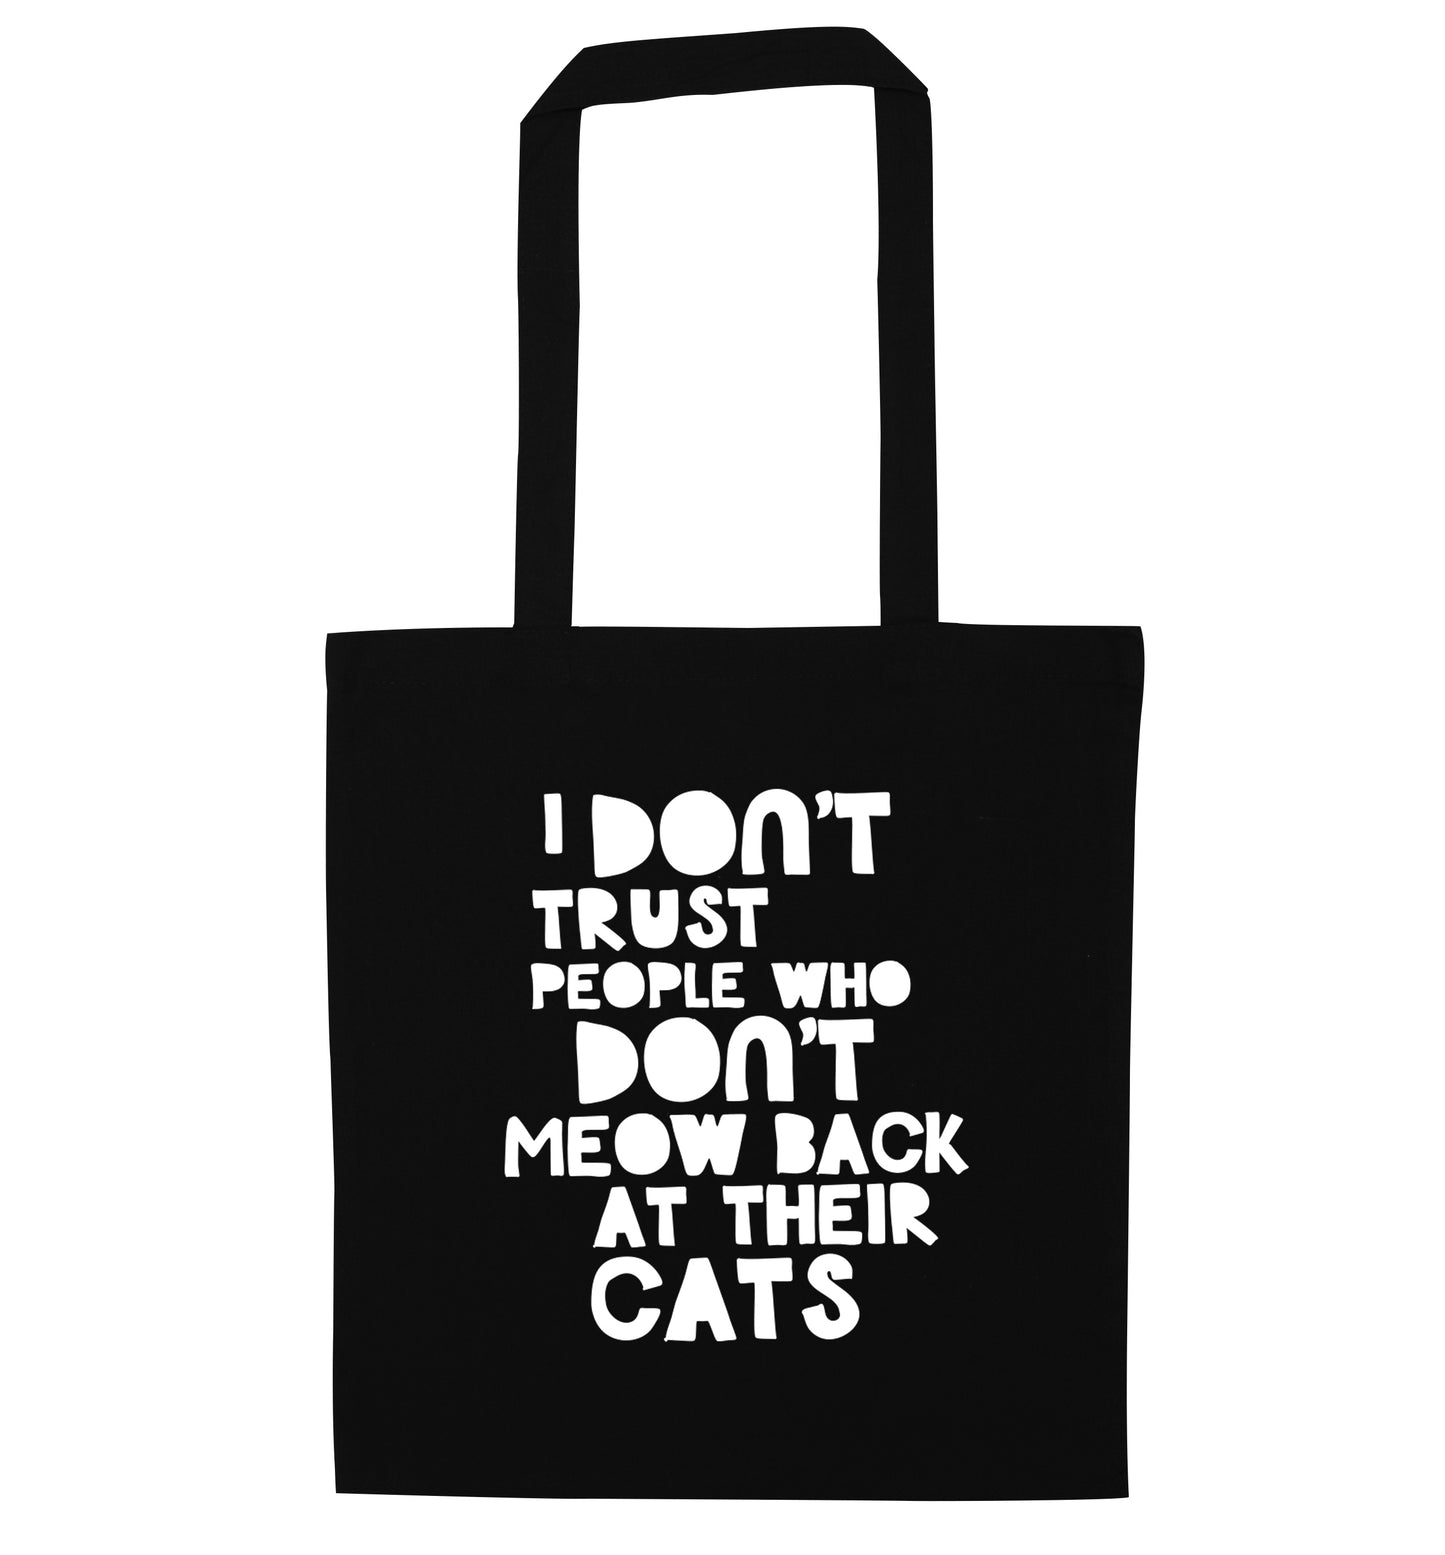 I don't trust people who don't meow back at their cats black tote bag